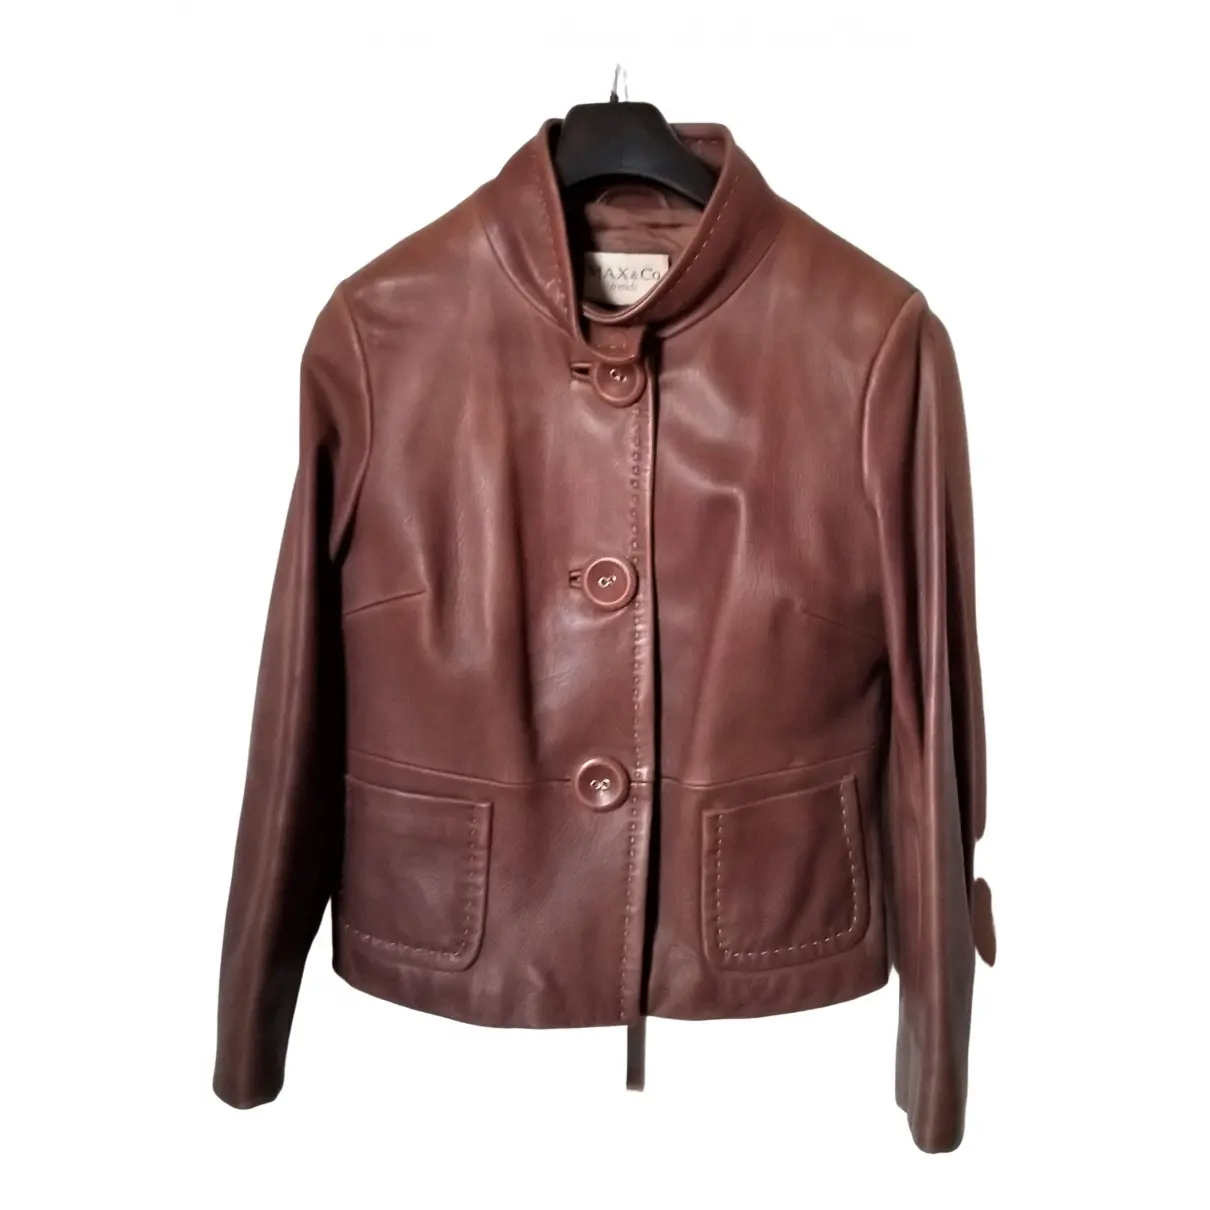 Leather caban Max & Co